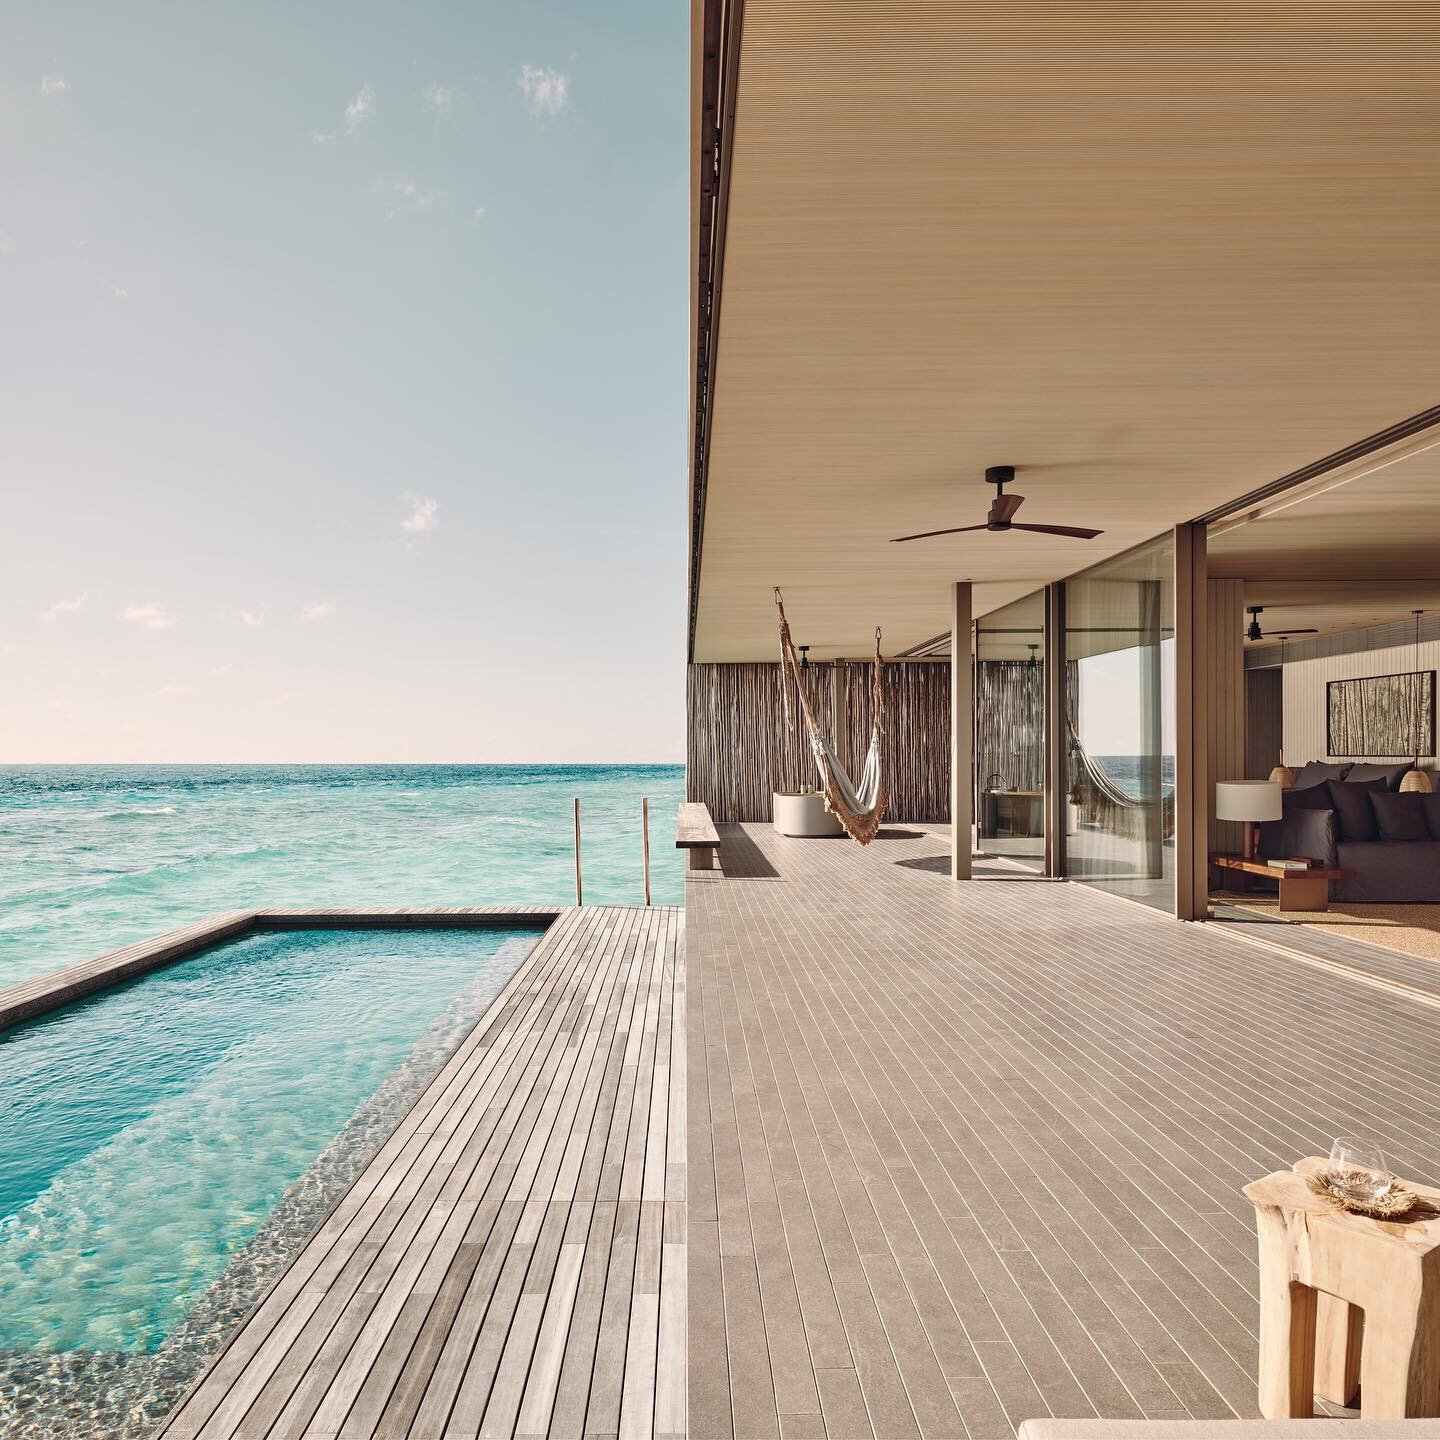 Patina Maldives, Fari Islands is breaking the mould of the region with its Modernist style and eco-conscious attitude. And I&rsquo;m dying to go!

Unlike many resorts across the Maldives, Patina has a laidback, barefoot-luxury style. They&rsquo;ve us